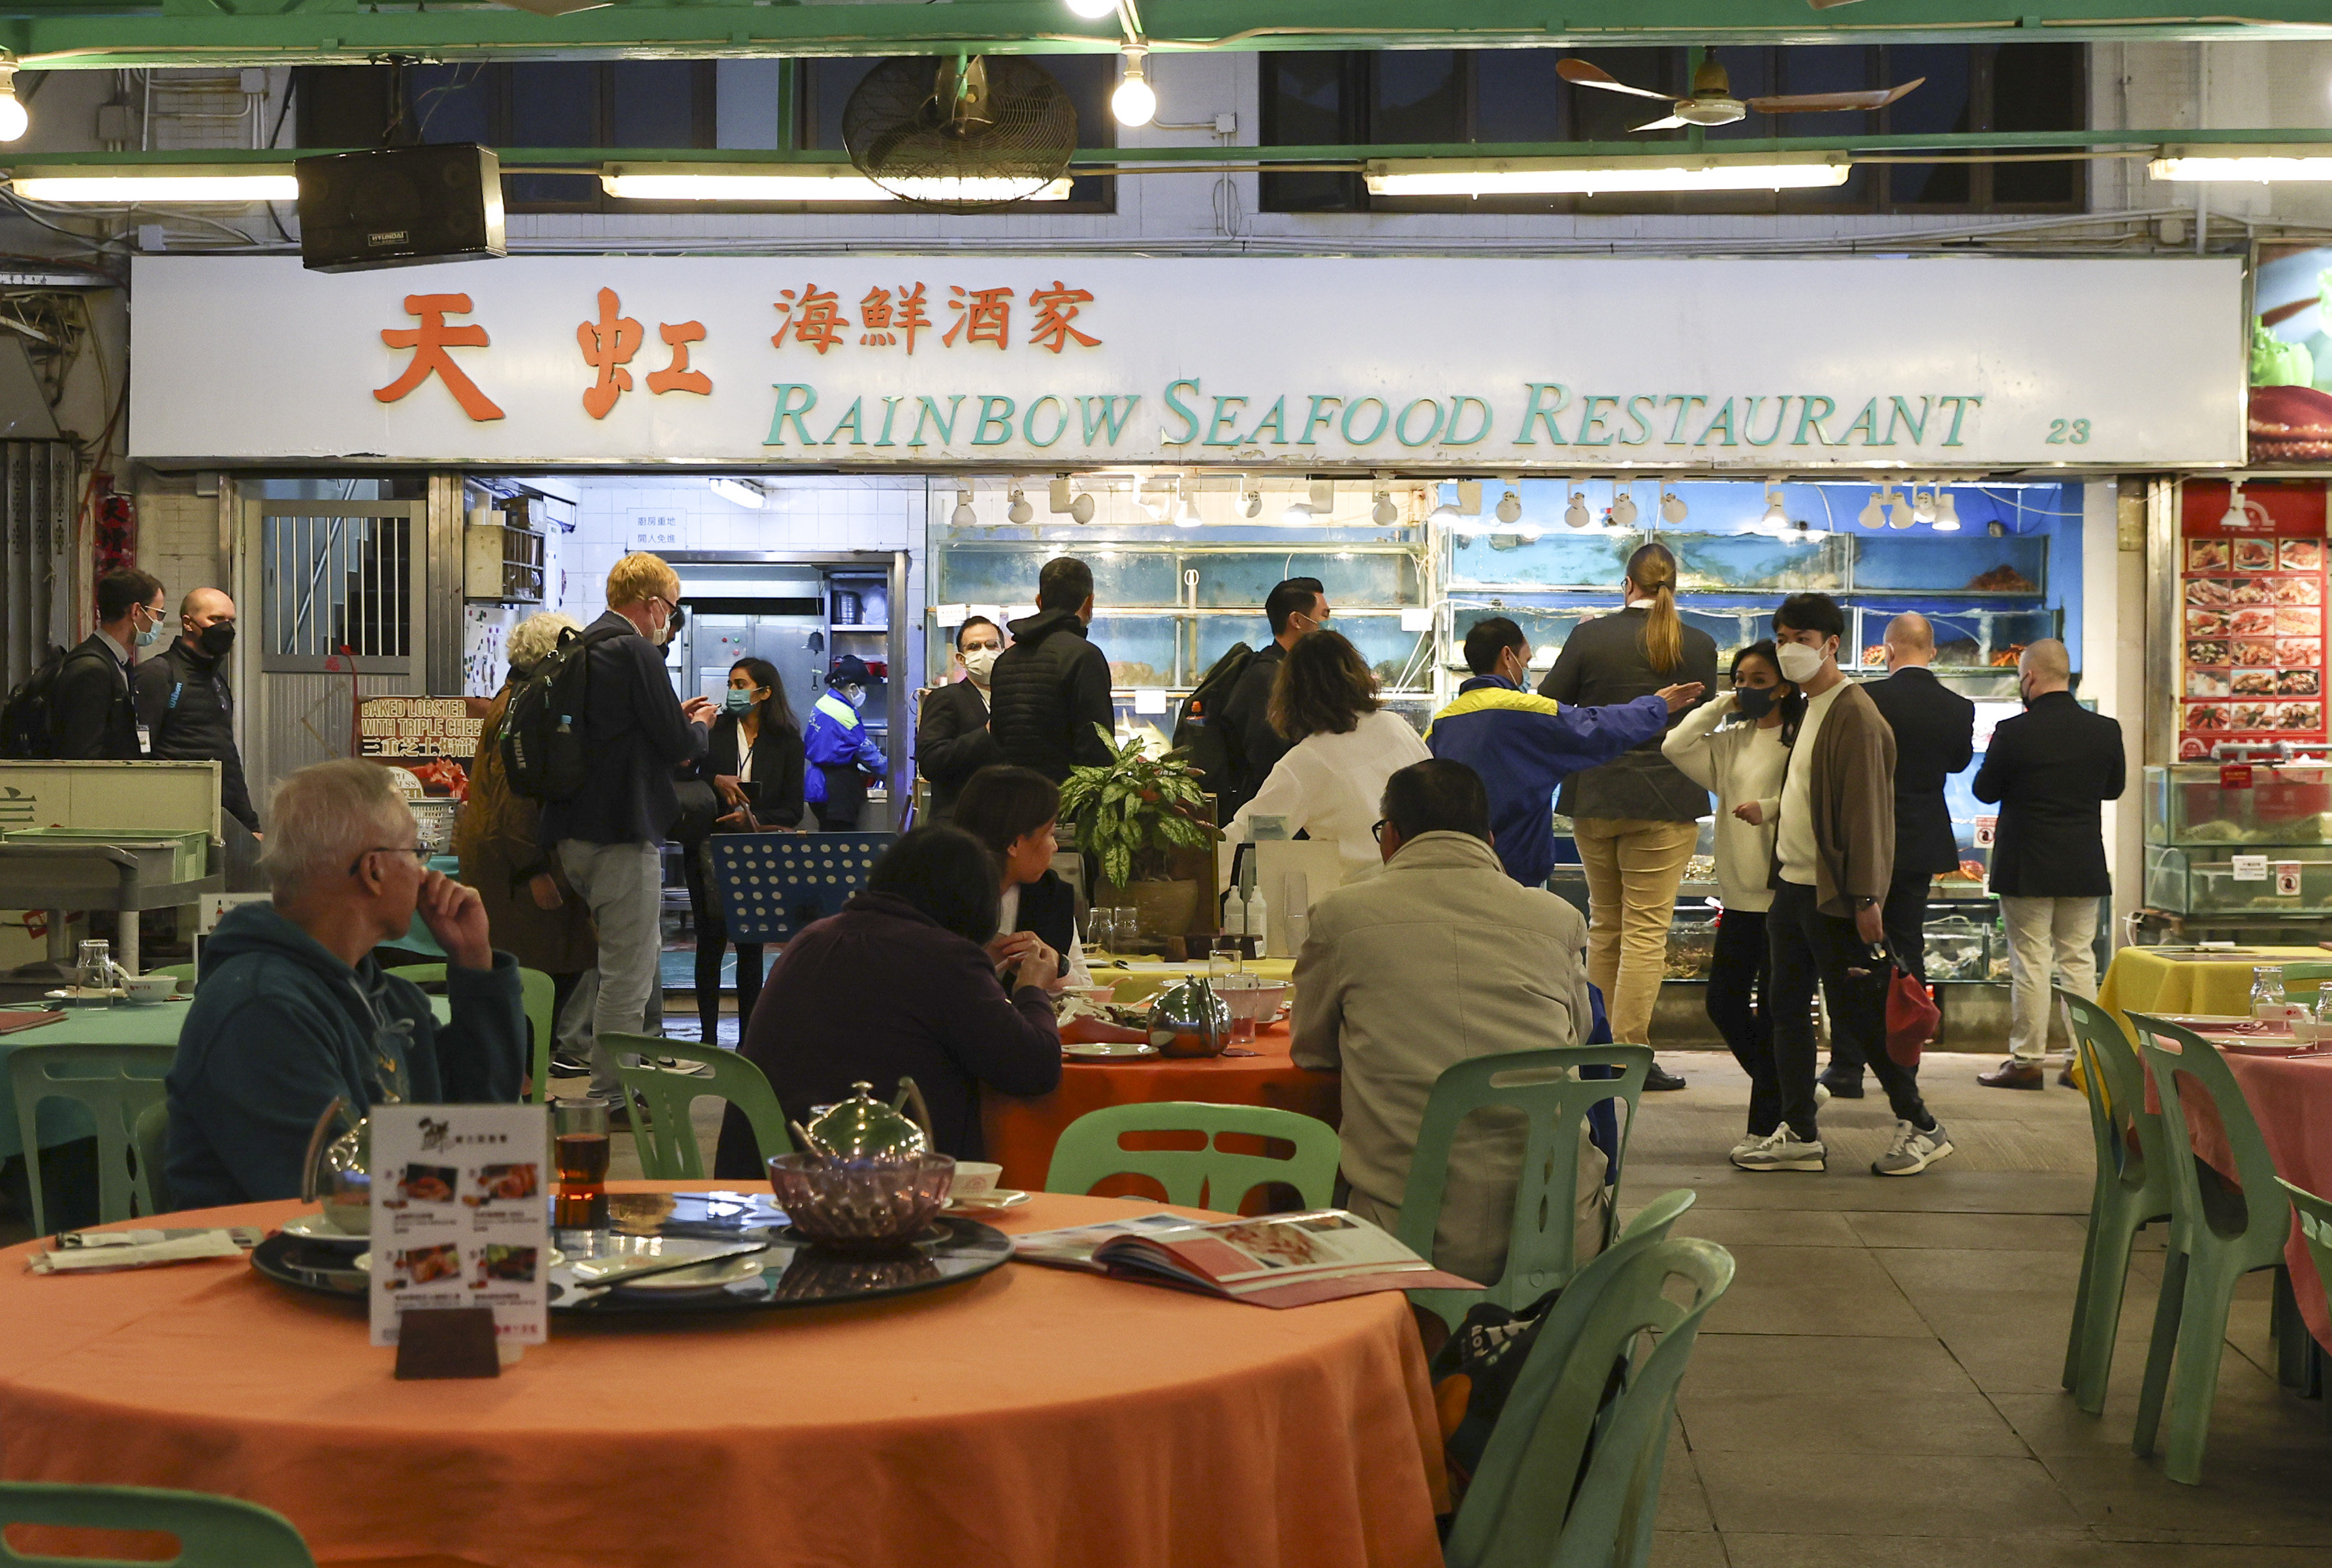 Carol Pak, a spokeswoman for the Lamma Rainbow Seafood Restaurant, said she agreed to host incoming tour groups after a travel agency approached her. Photo: Edmond So